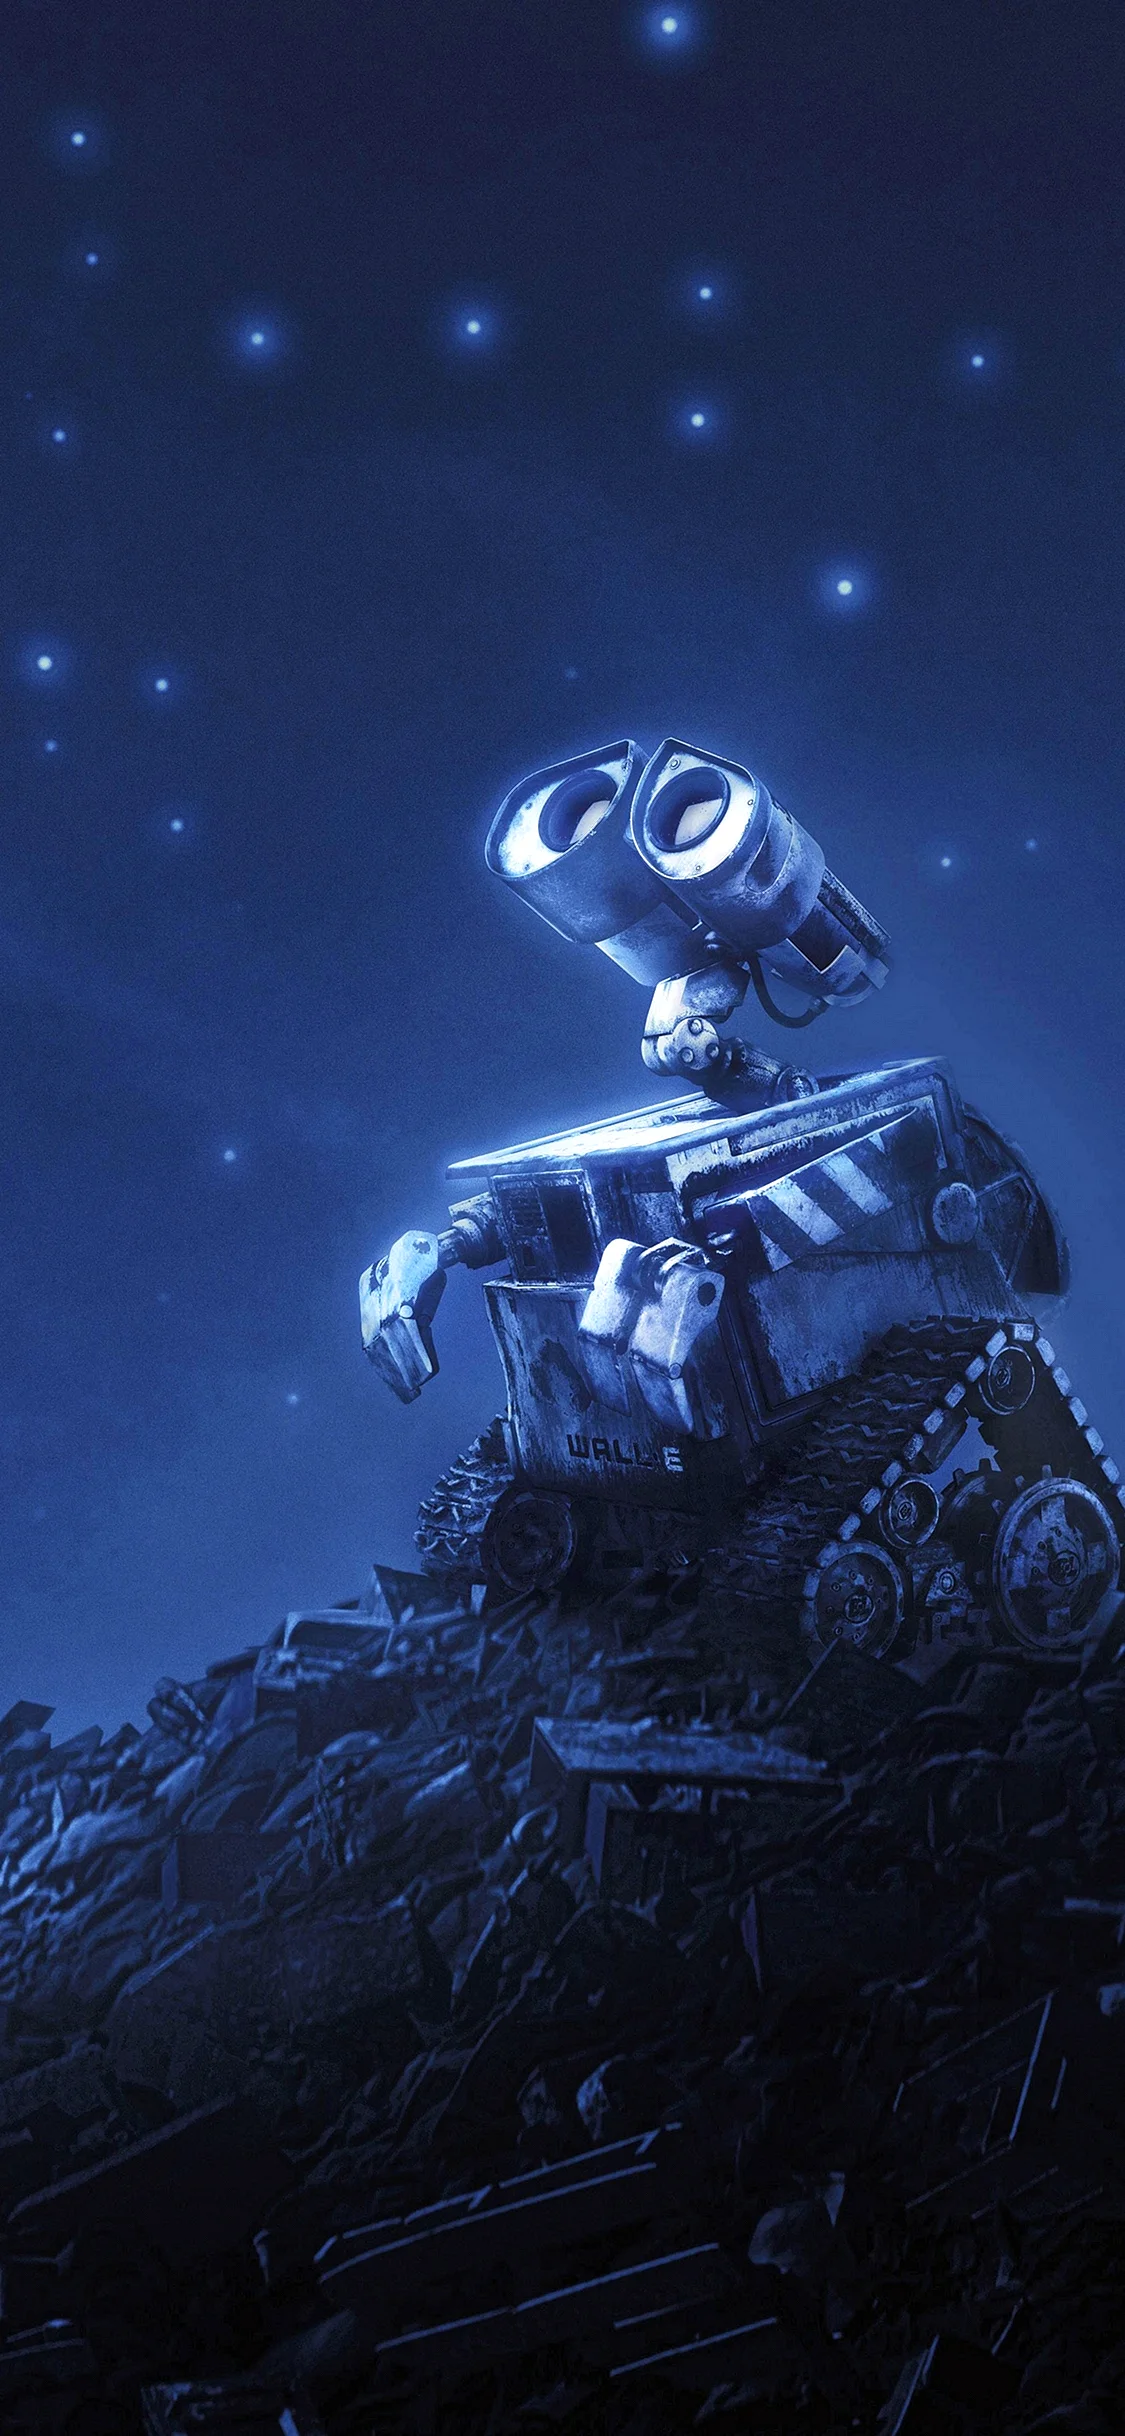 Wall-E 2008 Wallpaper for iPhone 11 Pro